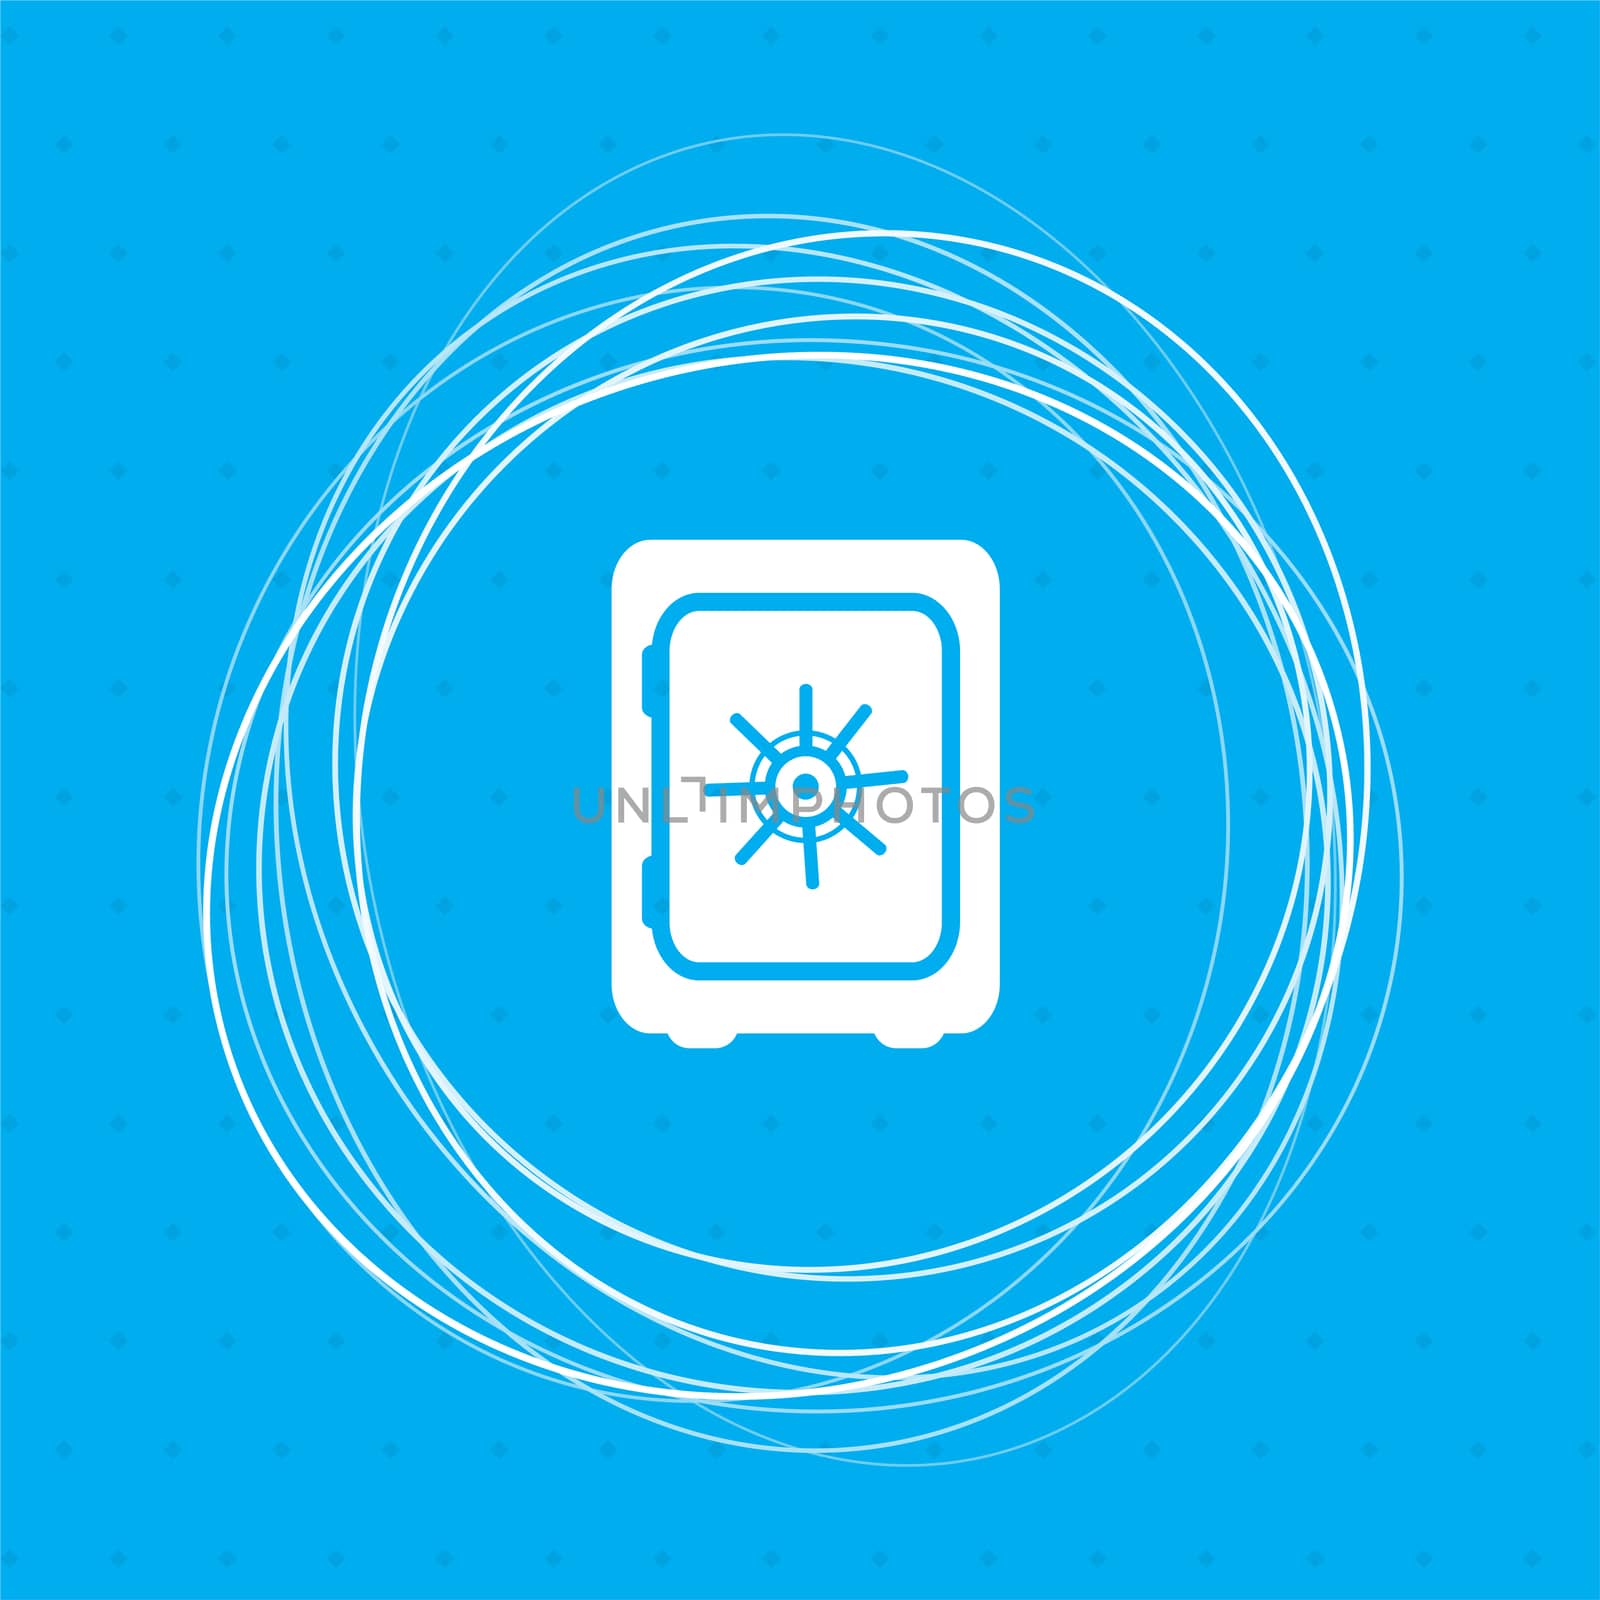 Safe money icon on a blue background with abstract circles around and place for your text.  by Adamchuk